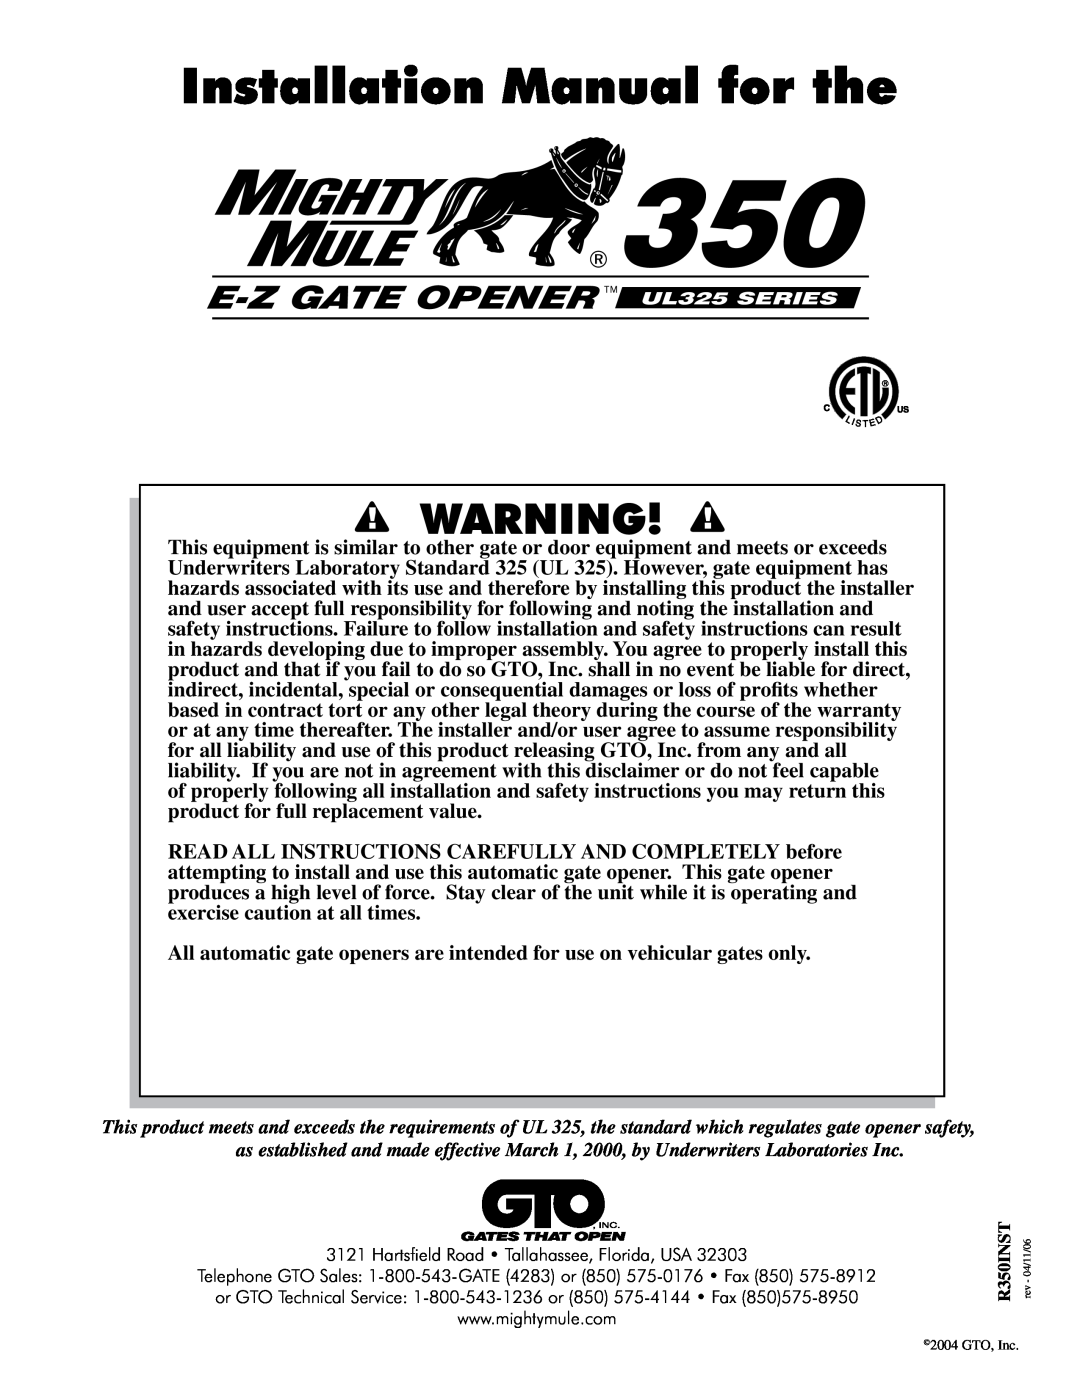 GTO installation manual Installation Manual for the, E-Z GATE OPENER UL325 SERIES 